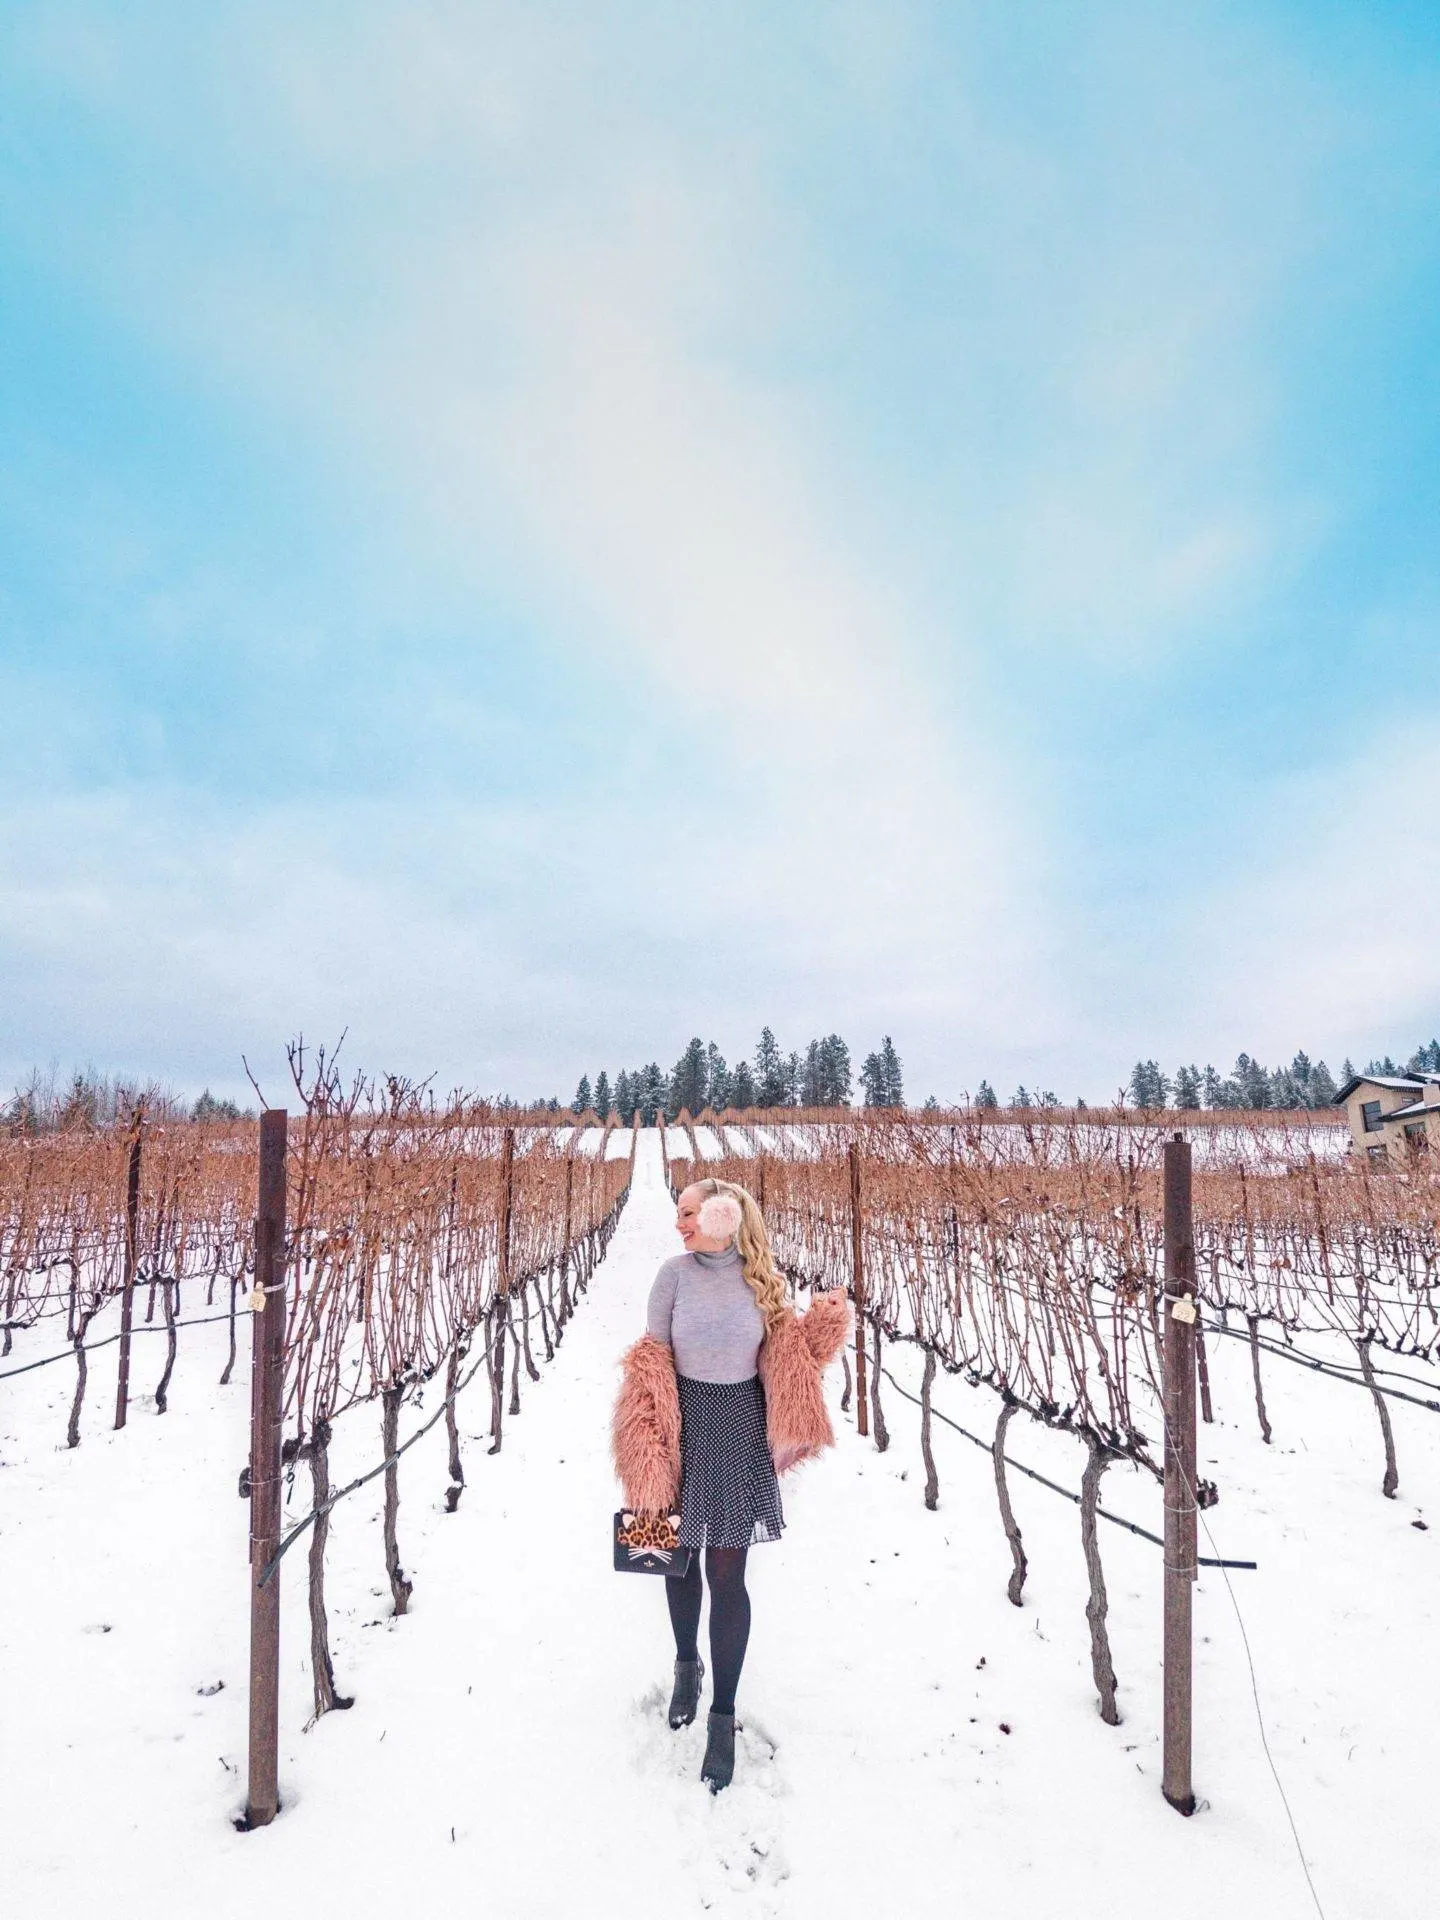 Ex Nihilo Vineyards (featured here) is a winery that excels in high quality and superb wines. Click for the rest of the list of our favourite wineries of Lake Country!